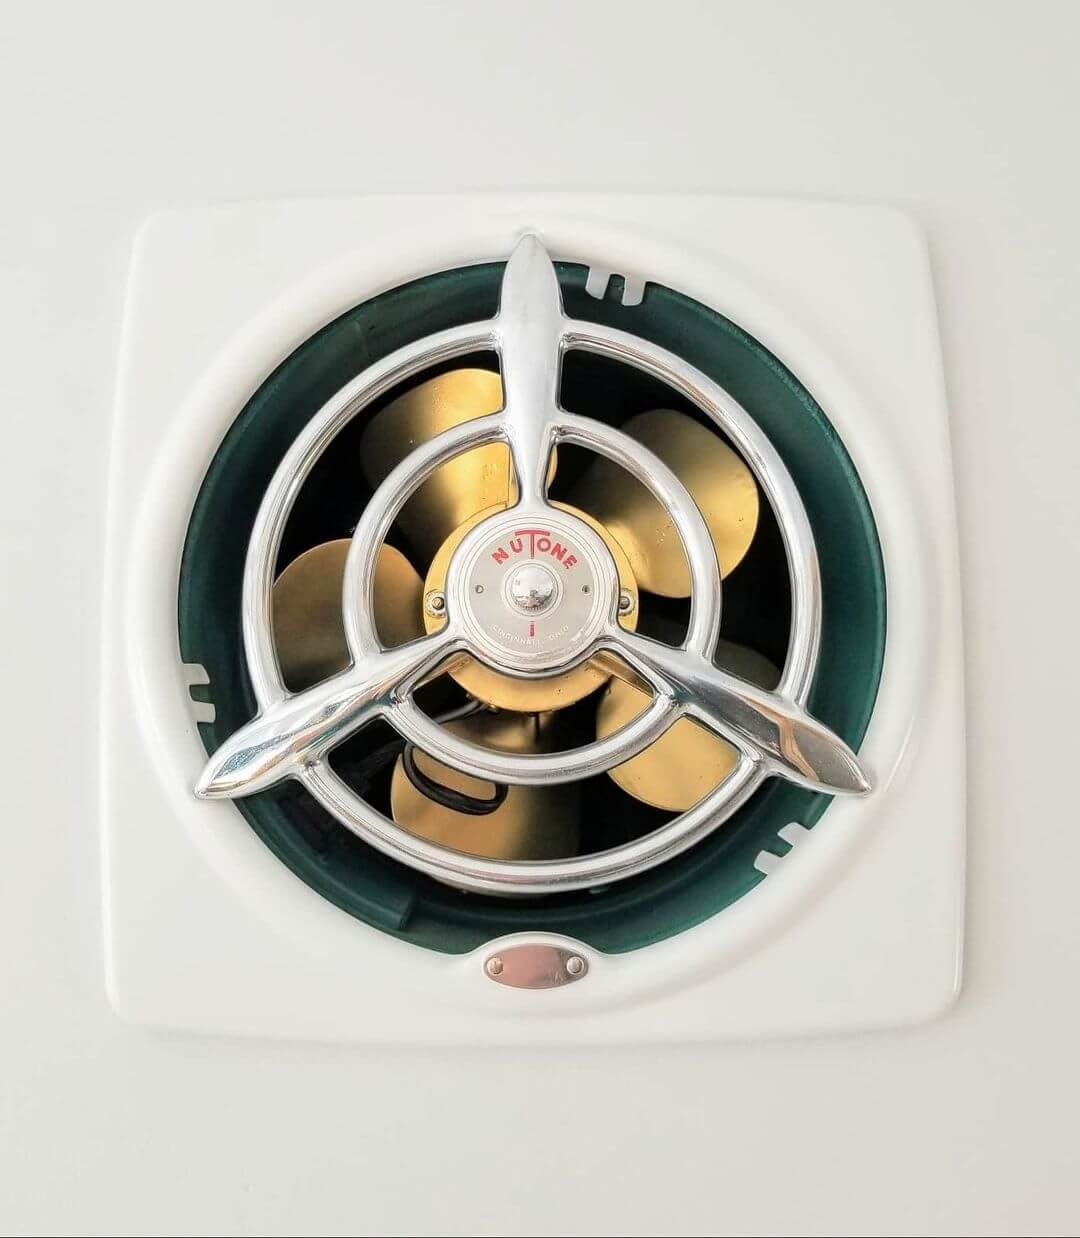 How To Remove And Replace Light Bulb In, How To Replace A Nutone Bathroom Fan With Light